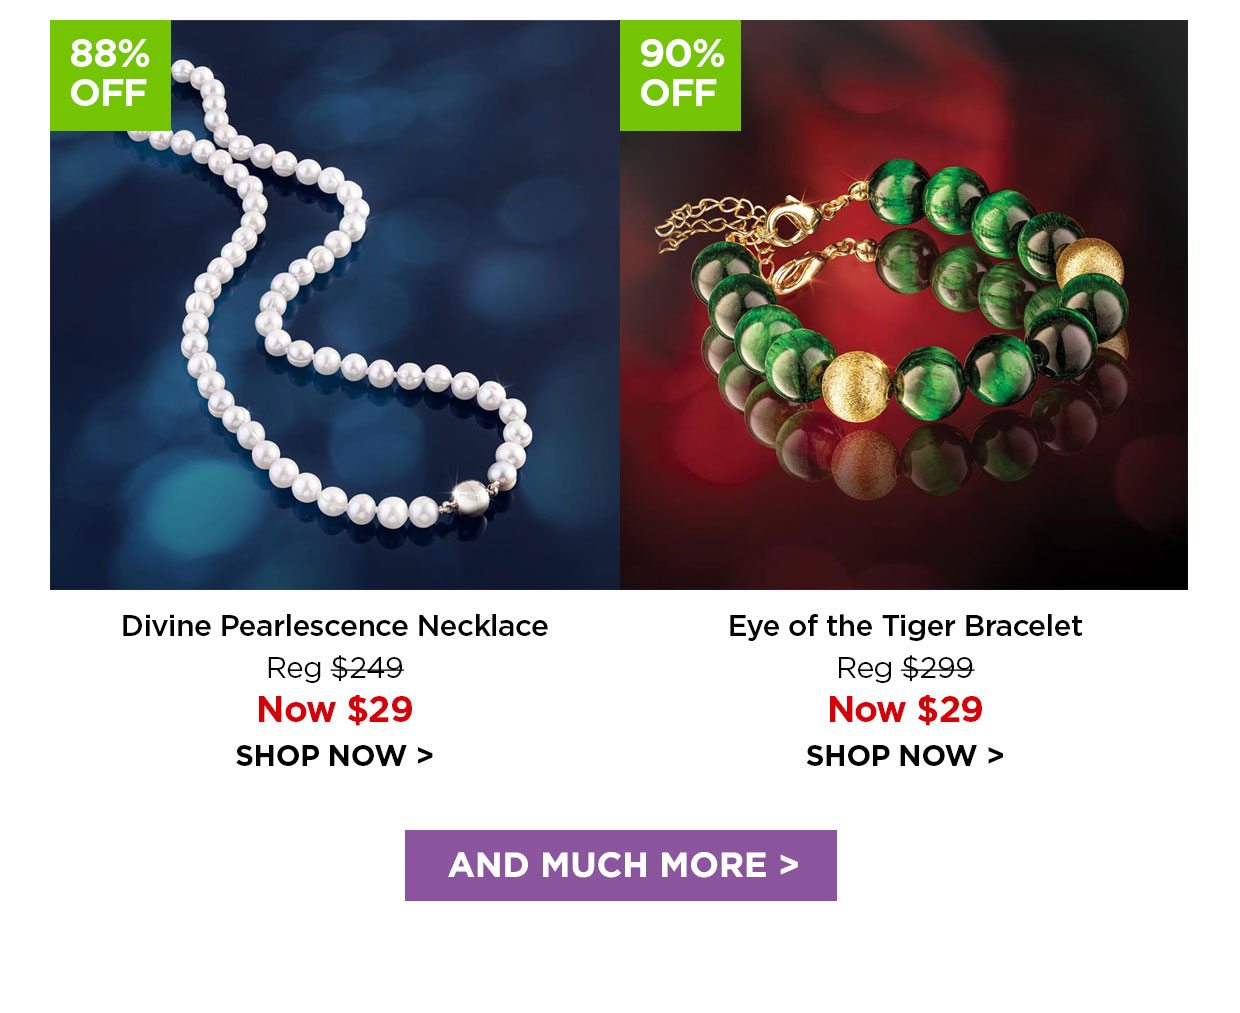 88% off. Divine Pearlescence Necklace Reg $249, Now $29. 90% off. Eye of the Tiger Bracelet Reg $299, Now $29. And Much More link.